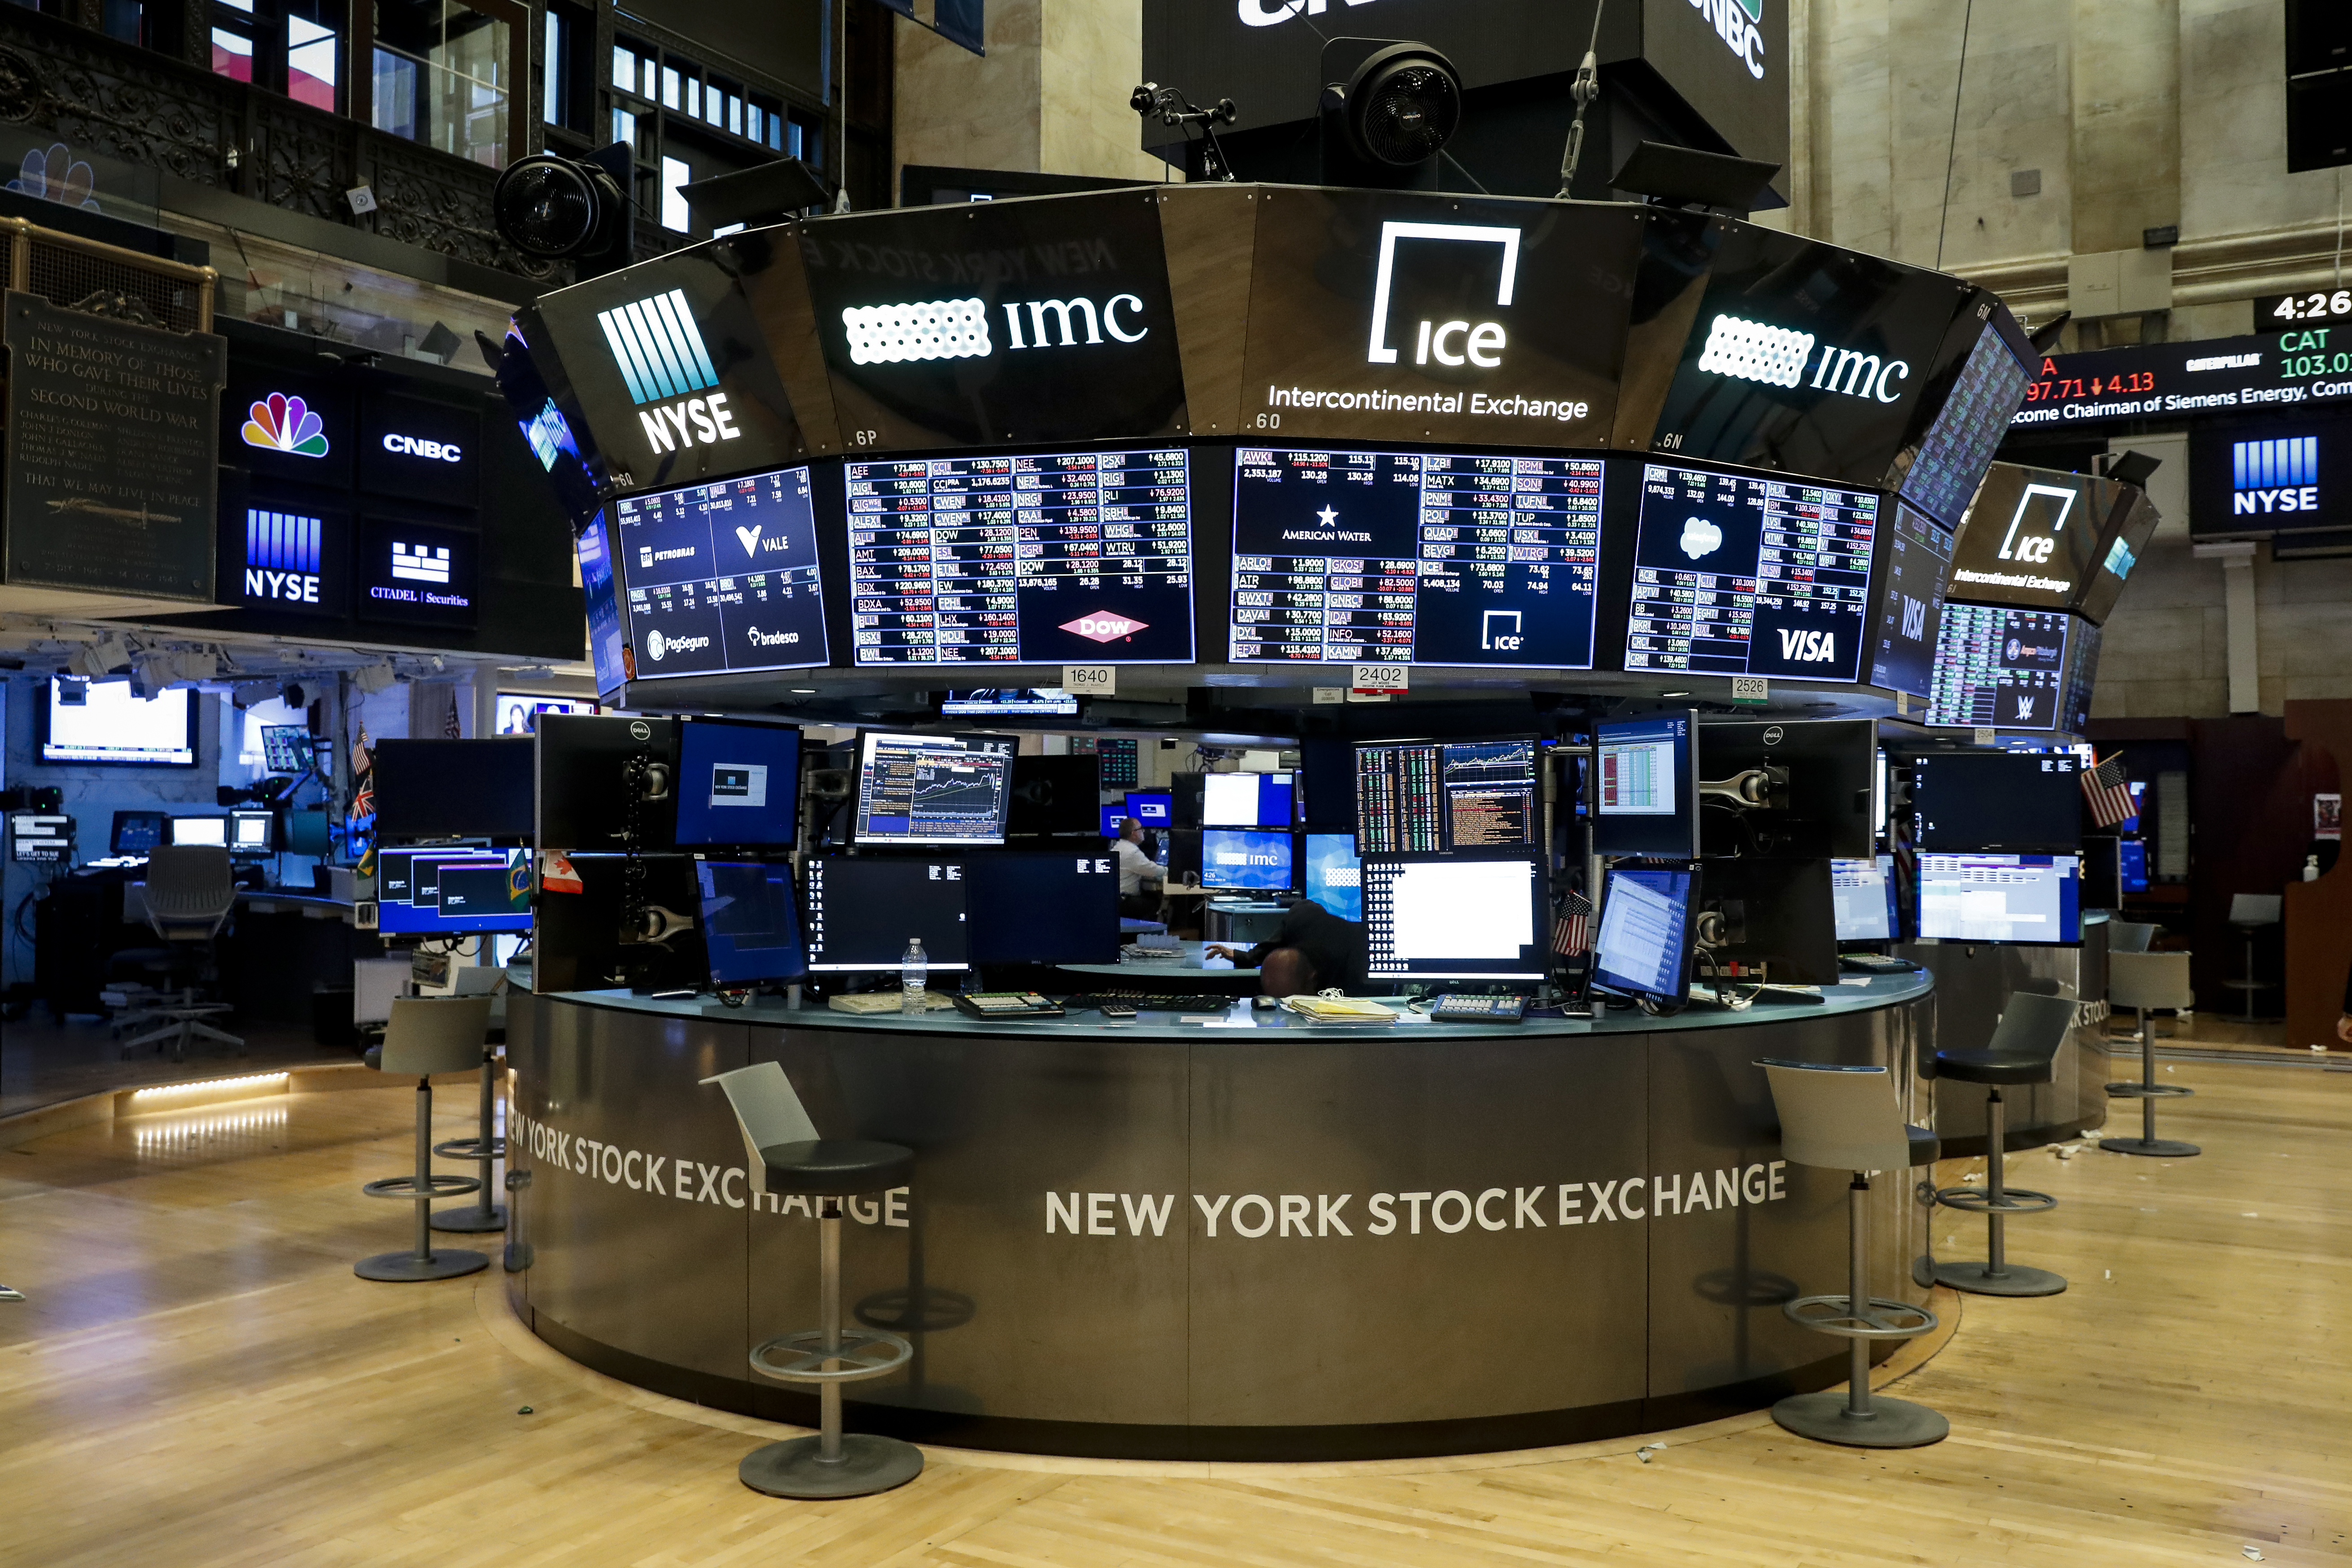 Floor traders work space is seen on the trading floor after the closing bell at the New York Stock Exchange (NYSE) in New York, U.S., March 19, 2020. REUTERS/Lucas Jackson